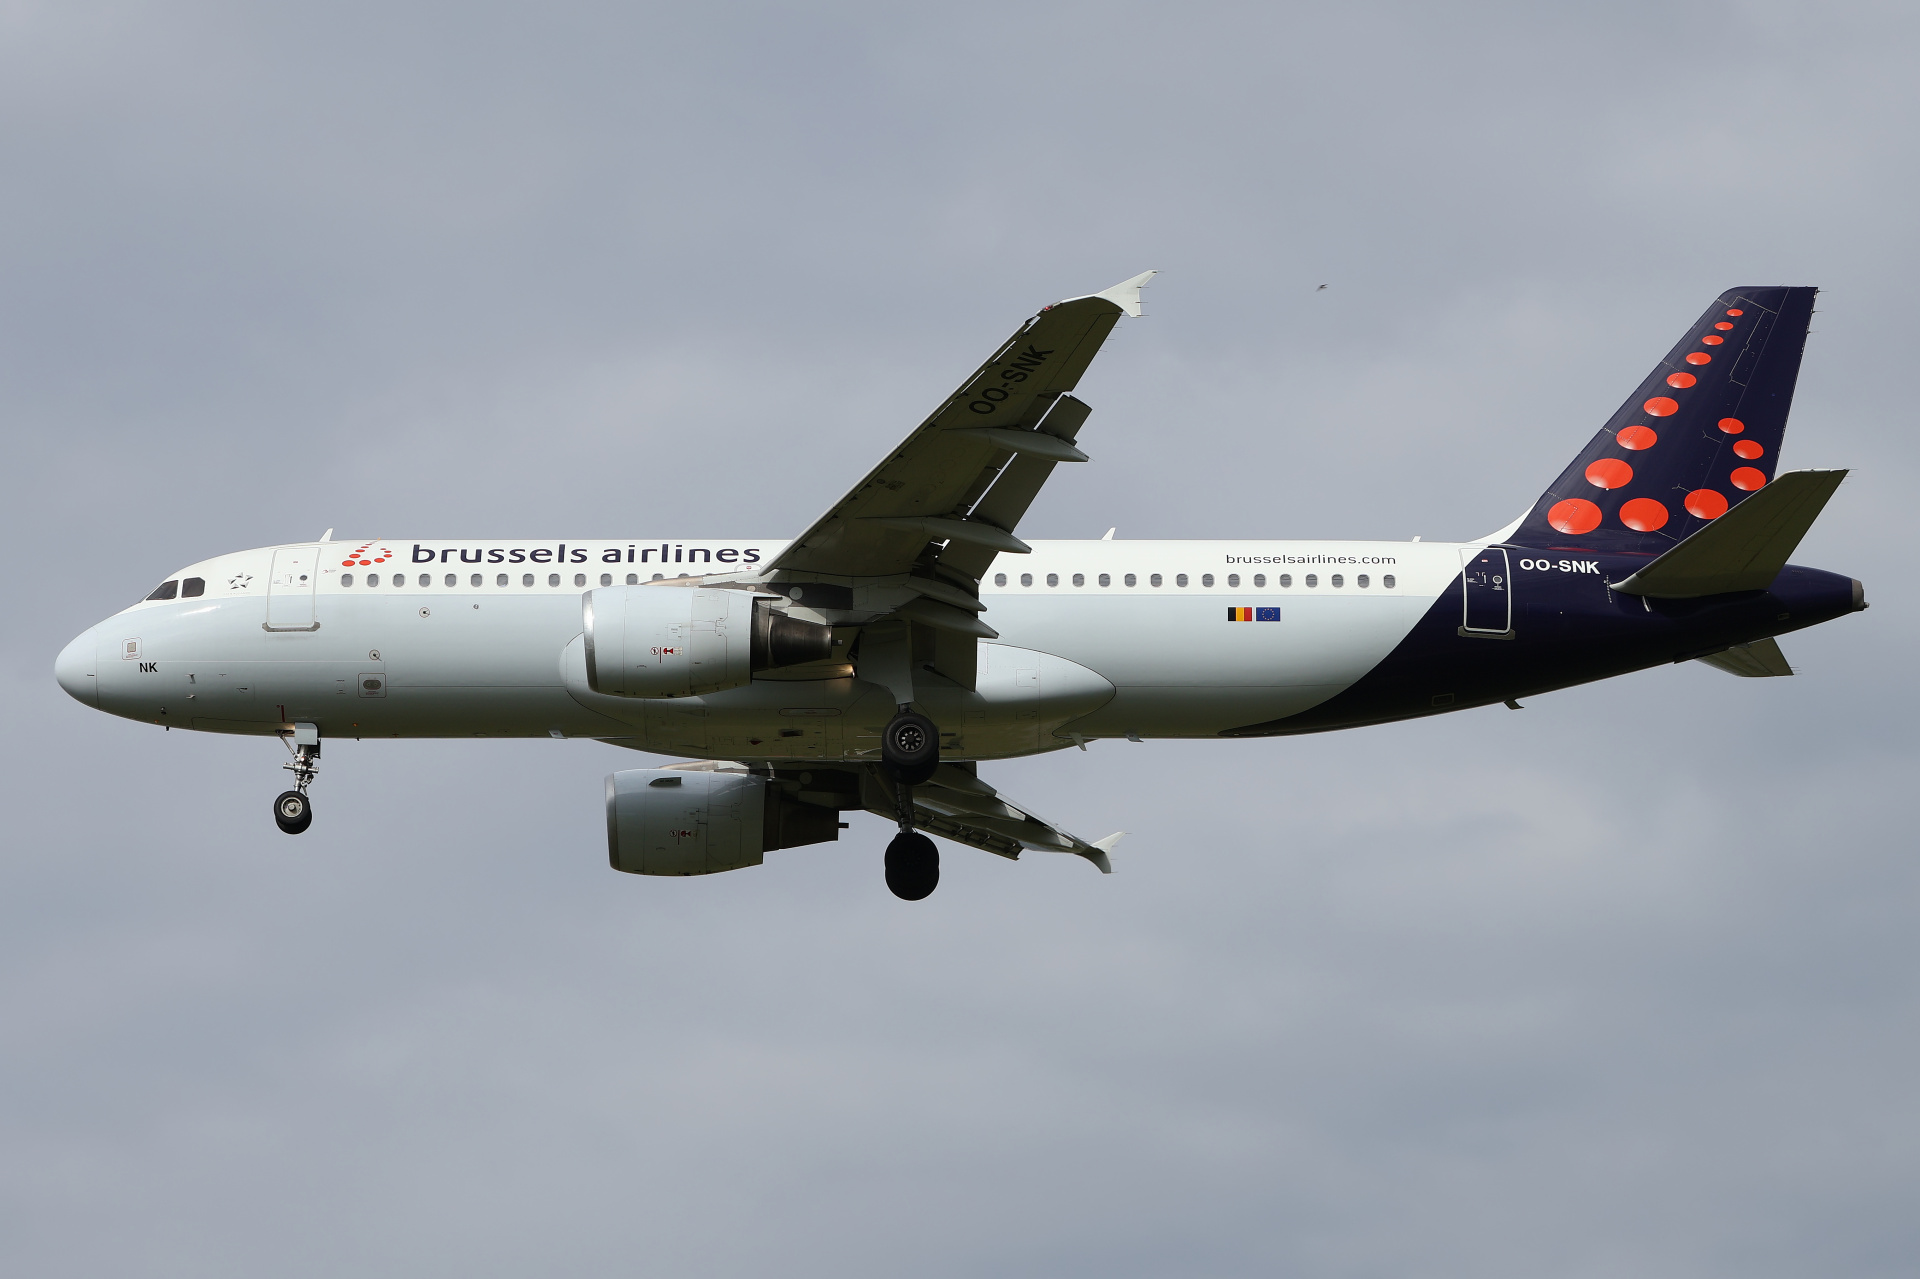 OO-SNK (Aircraft » EPWA Spotting » Airbus A320-200 » Brussels Airlines)